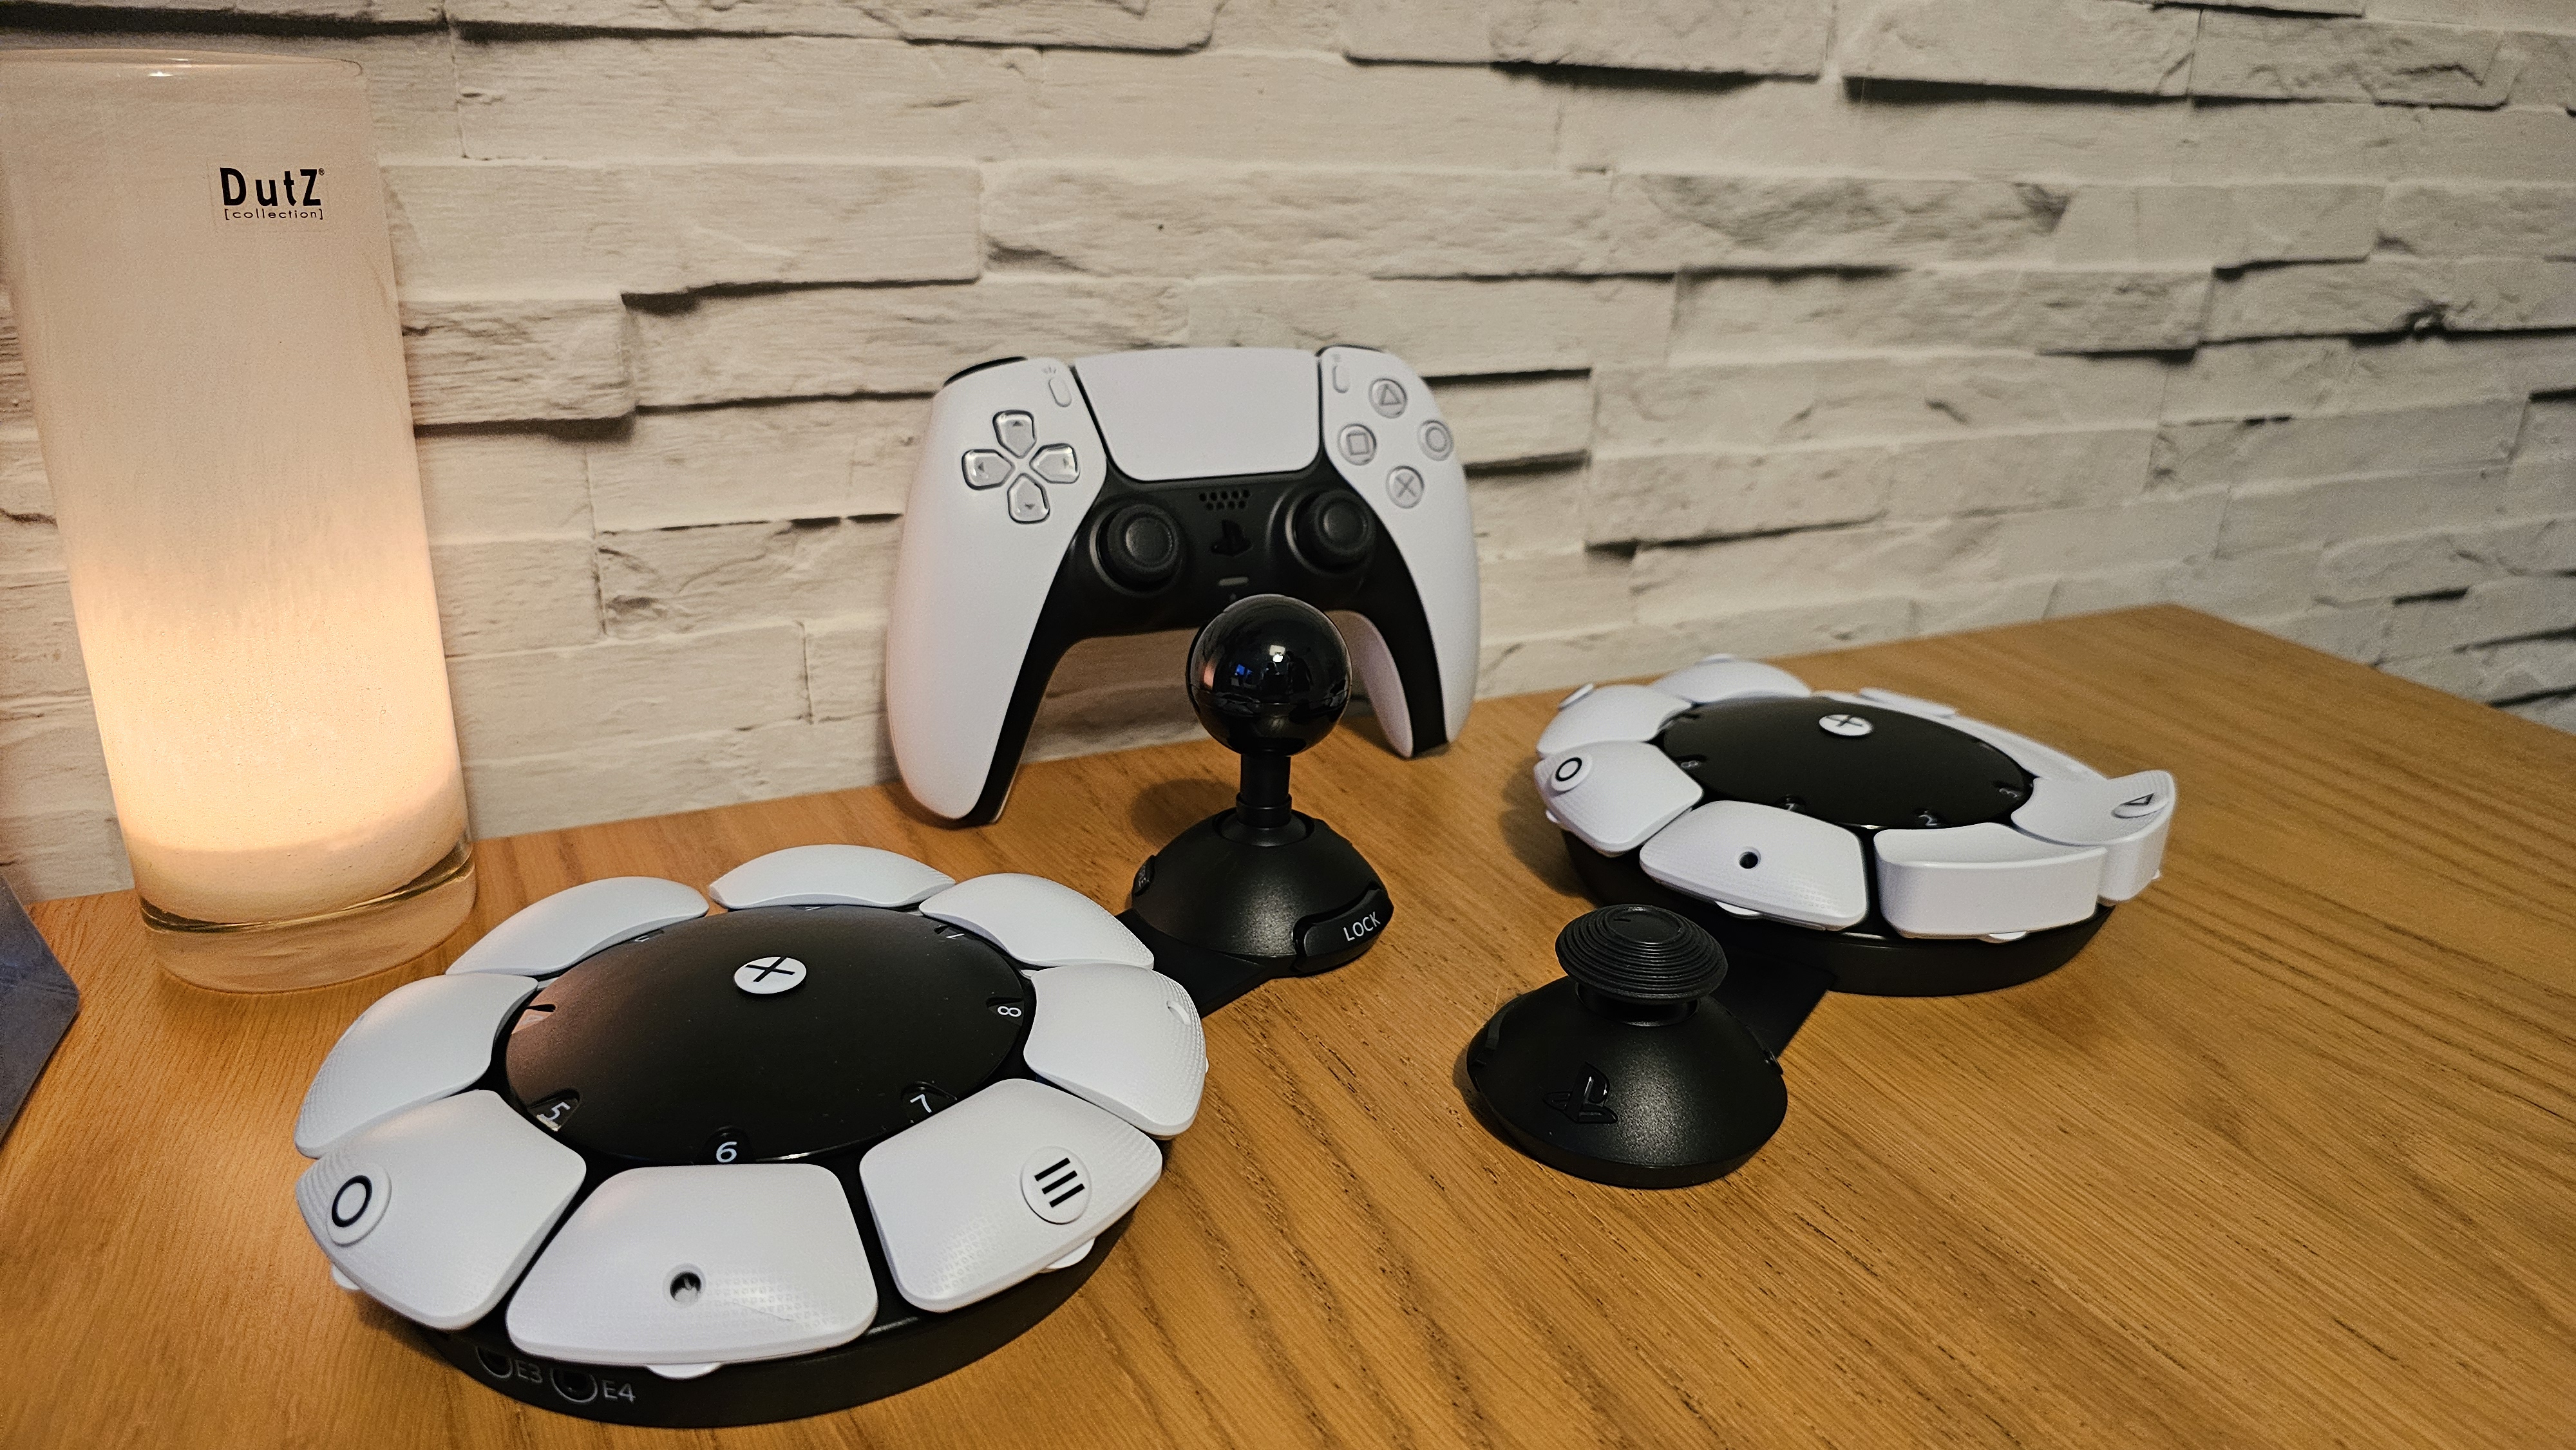 Two PlayStation Access controllers on a wooden surface with a DualSense controller